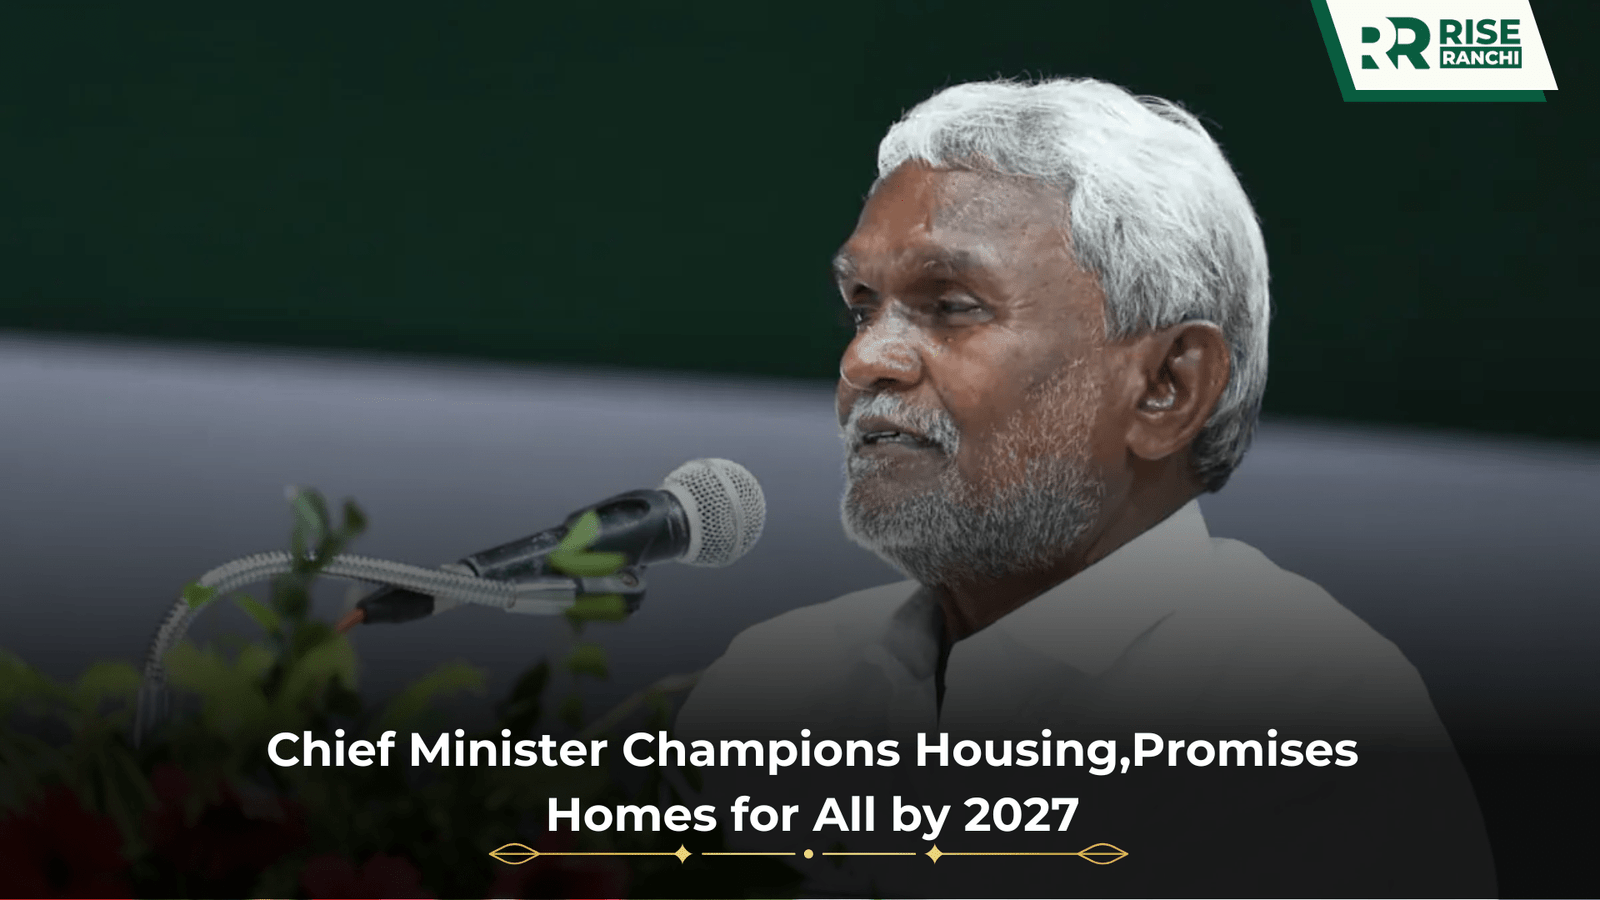 Chief Minister Champions Housing,Promises Homes for All by 2027